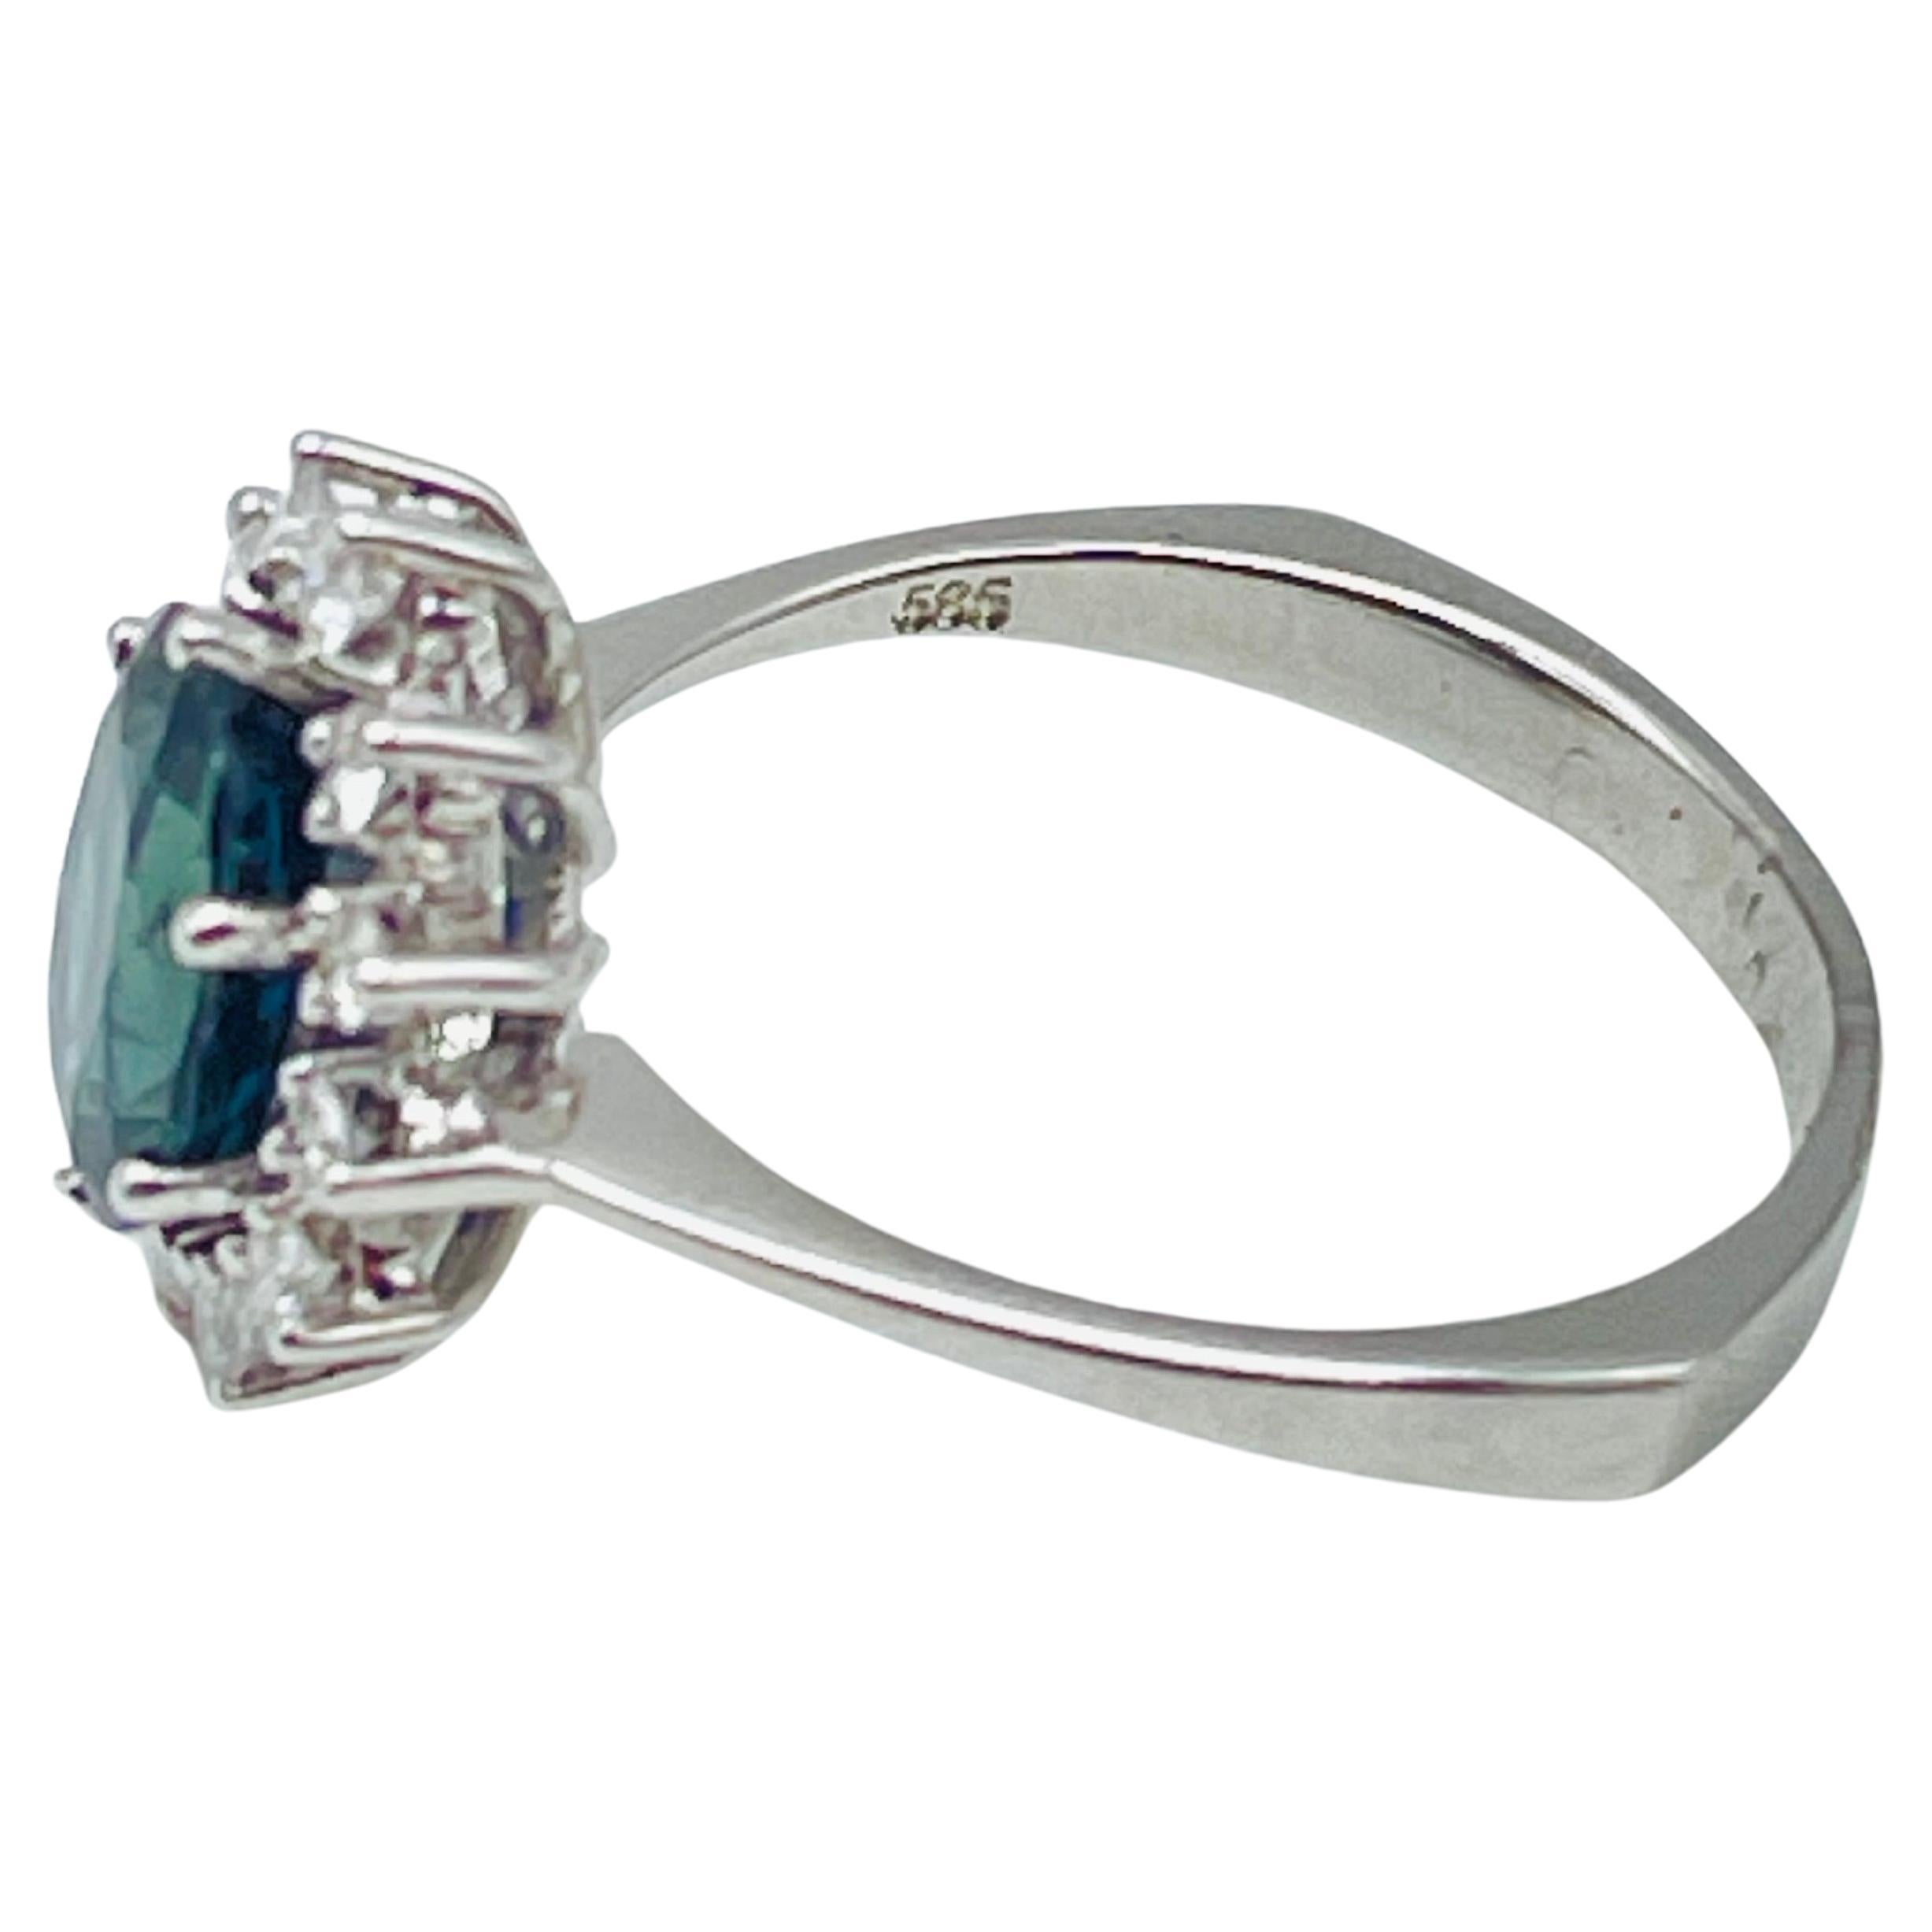 Fancy ring in lady diana still with diamonds and sapphire For Sale 1